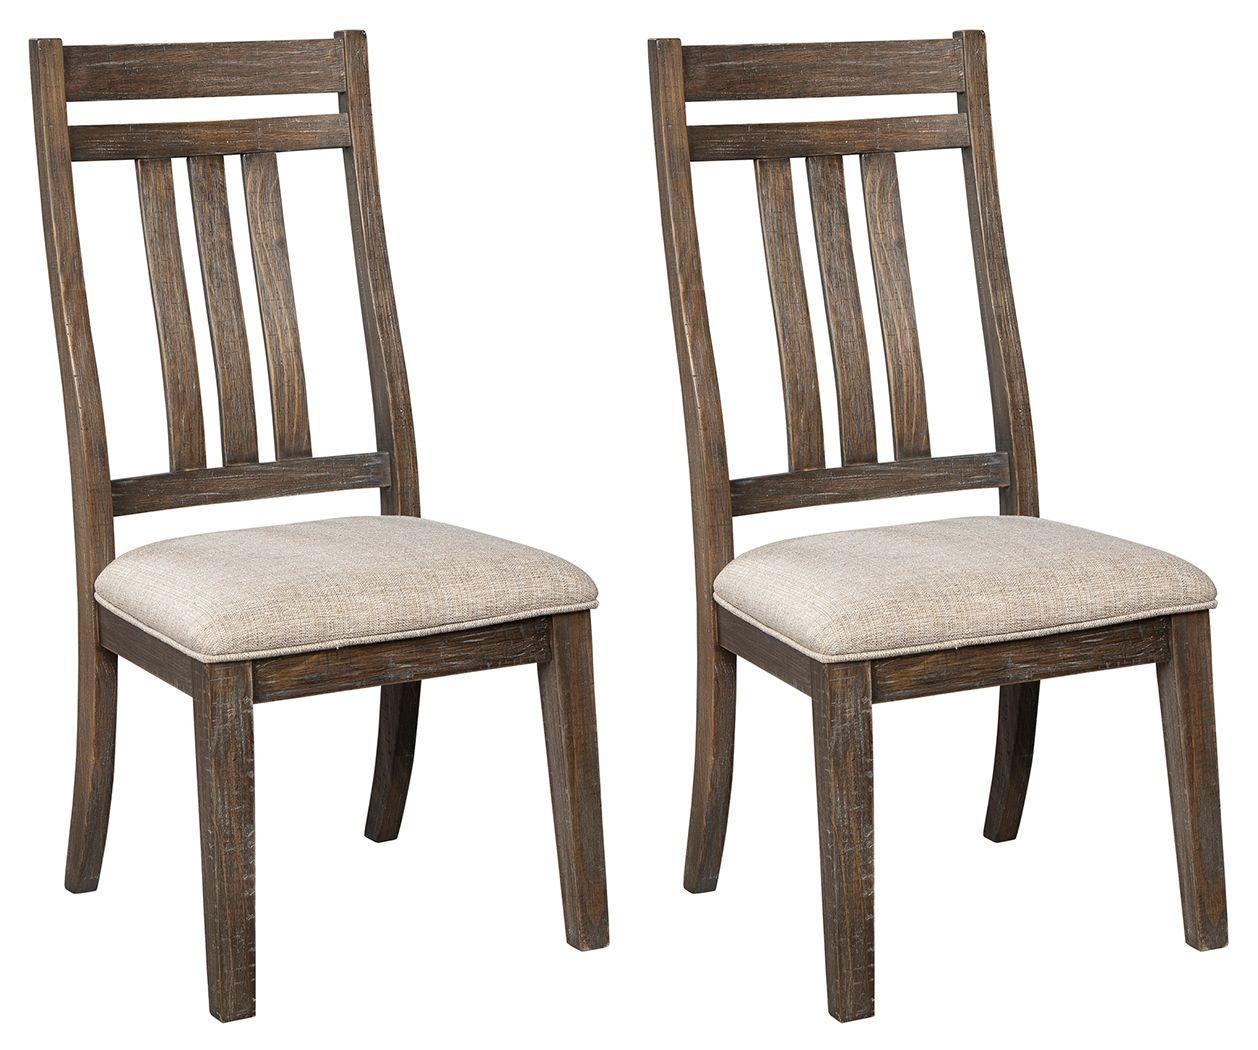 Wyndahl - Rustic Brown - Dining Uph Side Chair (Set of 2) - Slatback Tony's Home Furnishings Furniture. Beds. Dressers. Sofas.